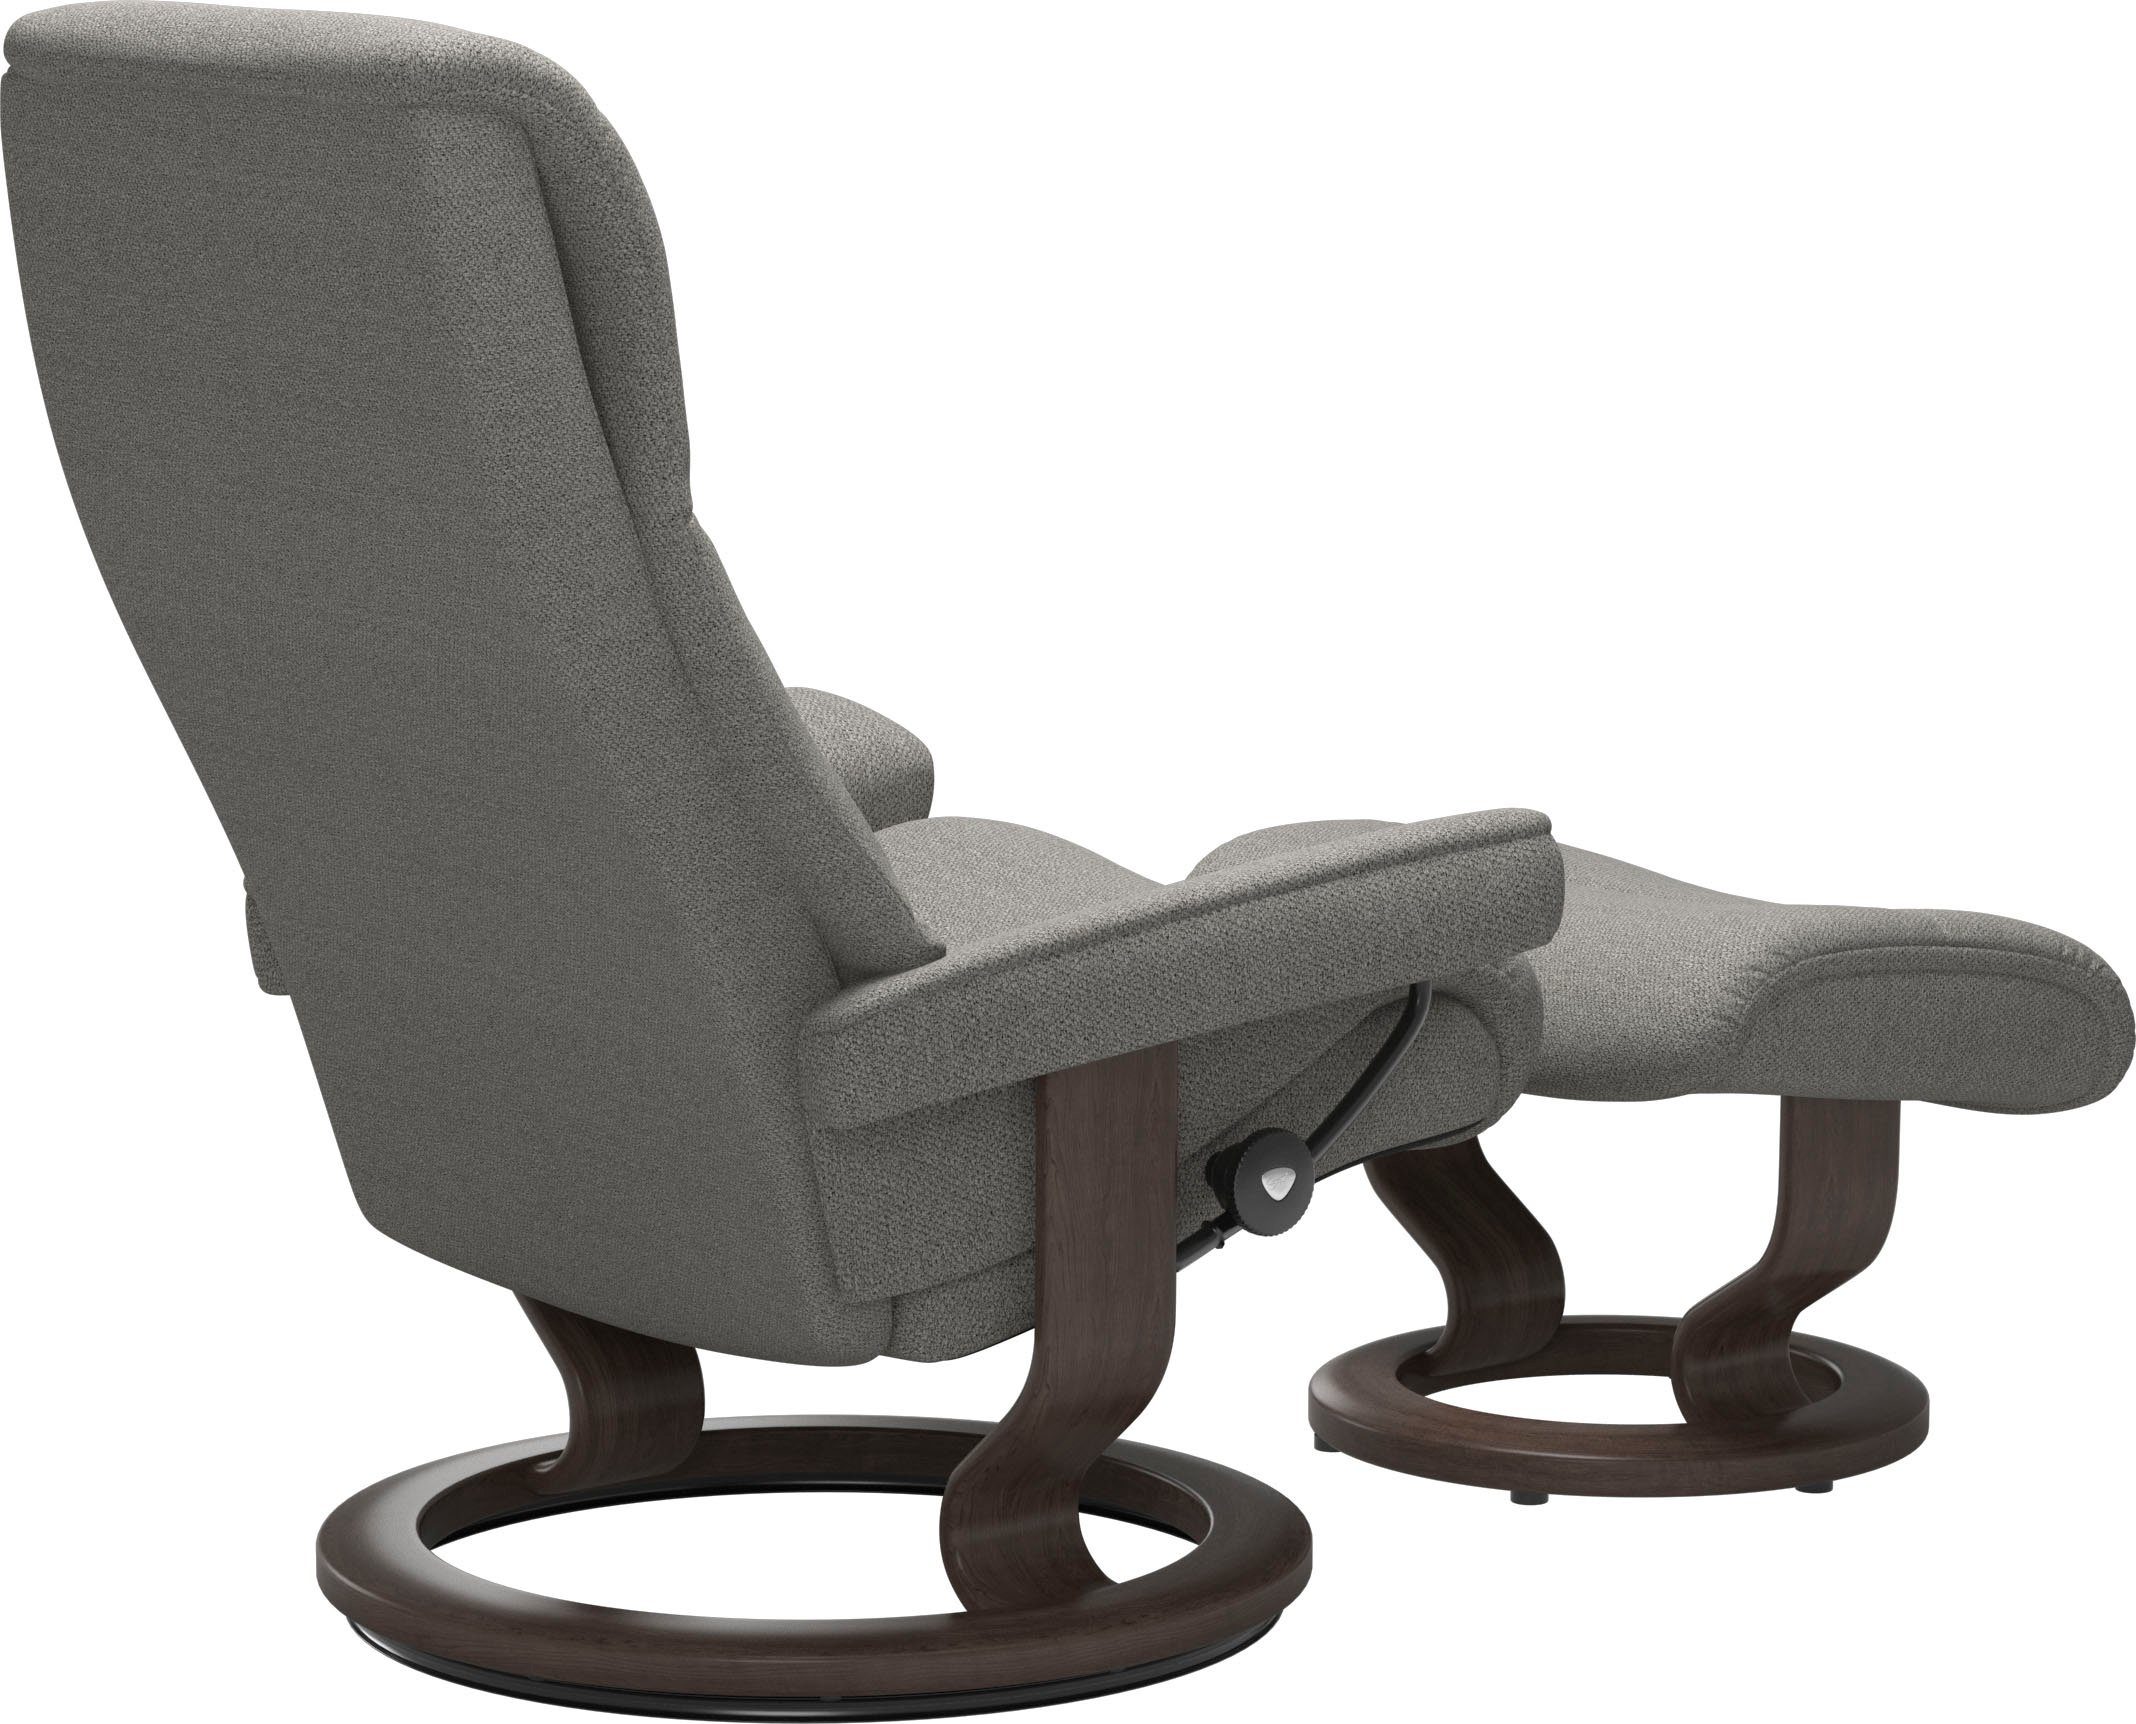 Classic Relaxsessel mit Wenge View, Base, Stressless® L,Gestell Größe